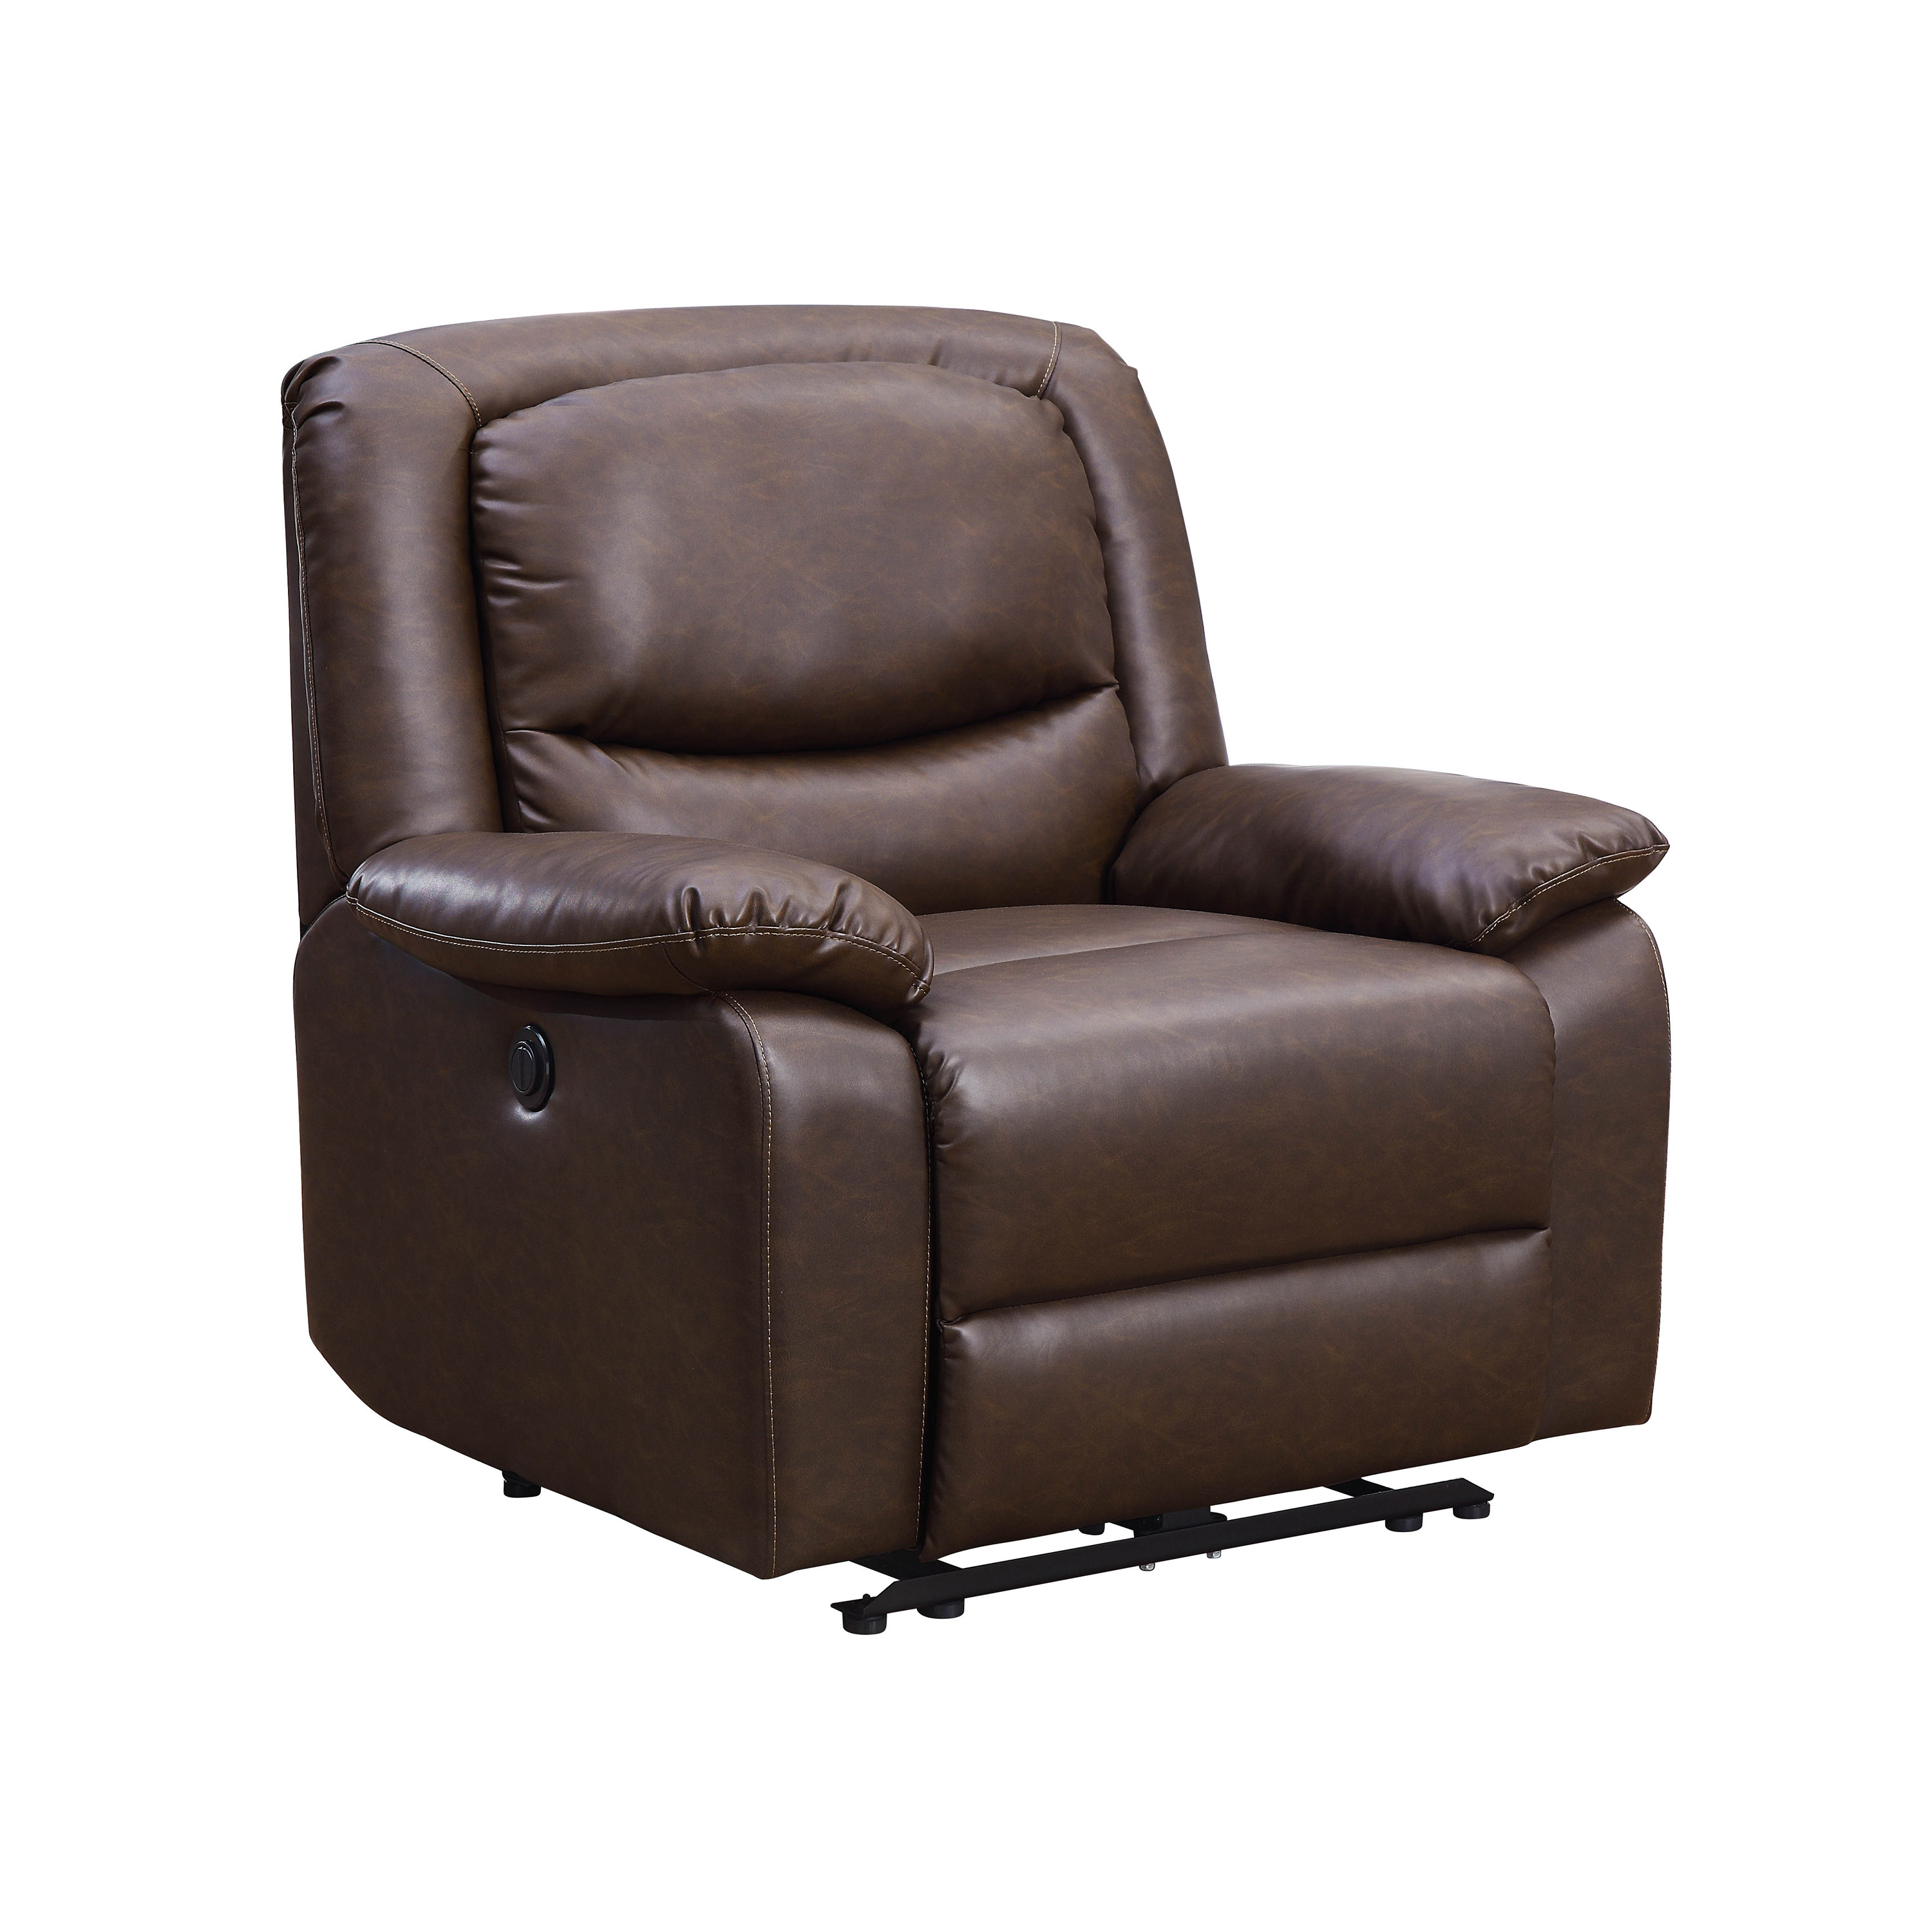 Serta Push-Button Power Recliner with Deep Body Cushions, Brown Faux Leather Upholstery - image 1 of 9